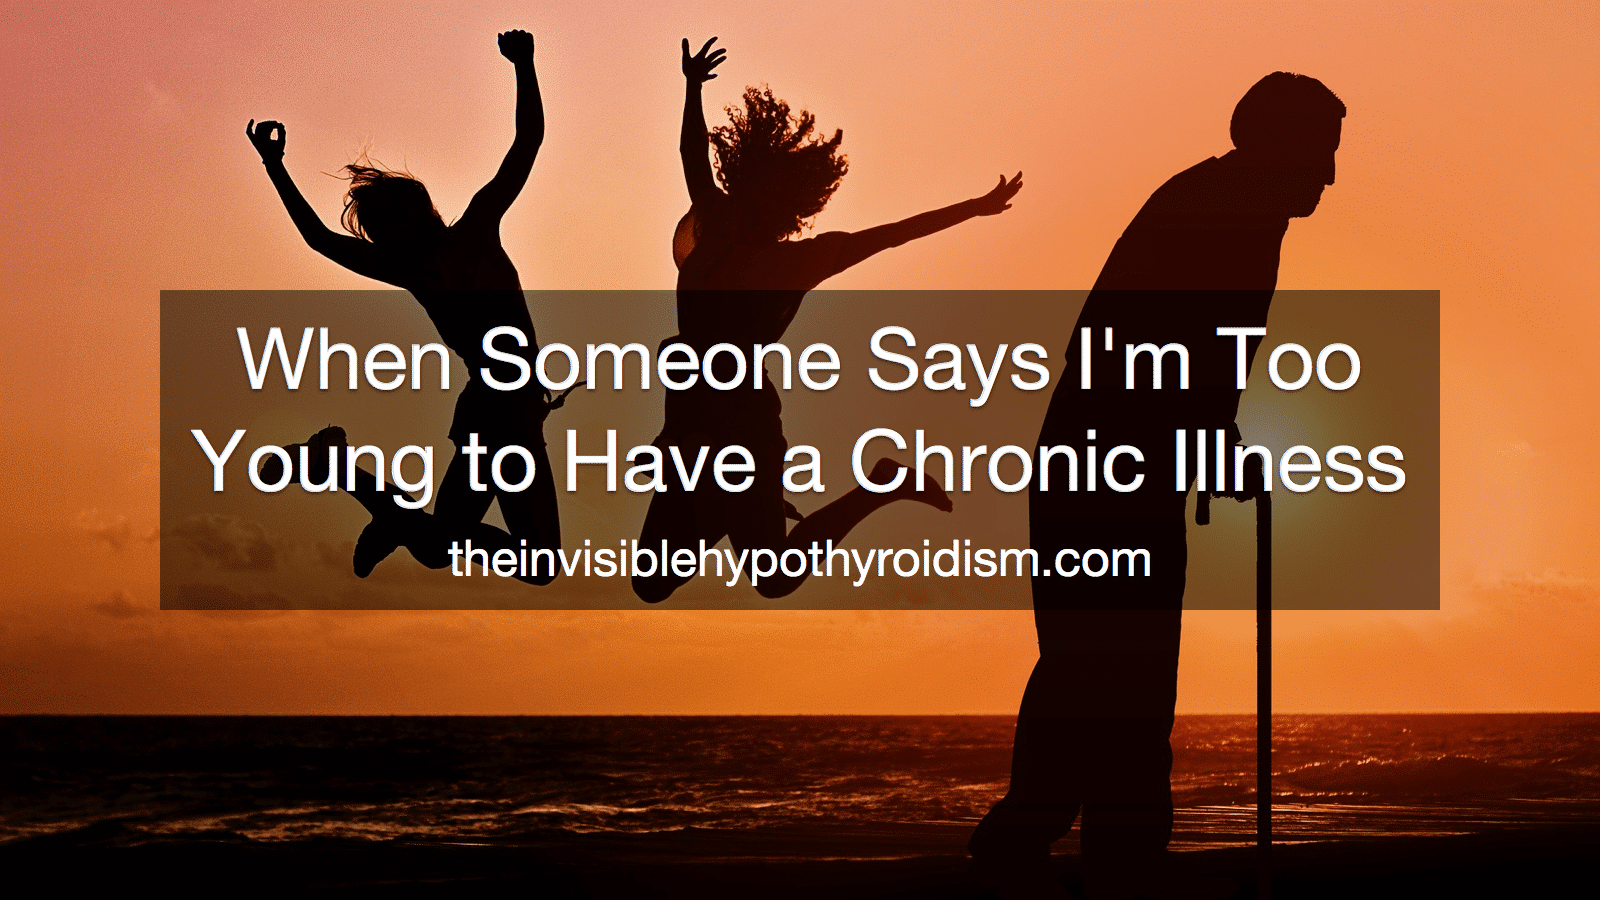 When Someone Says I'm Too Young to Have a Chronic Illness